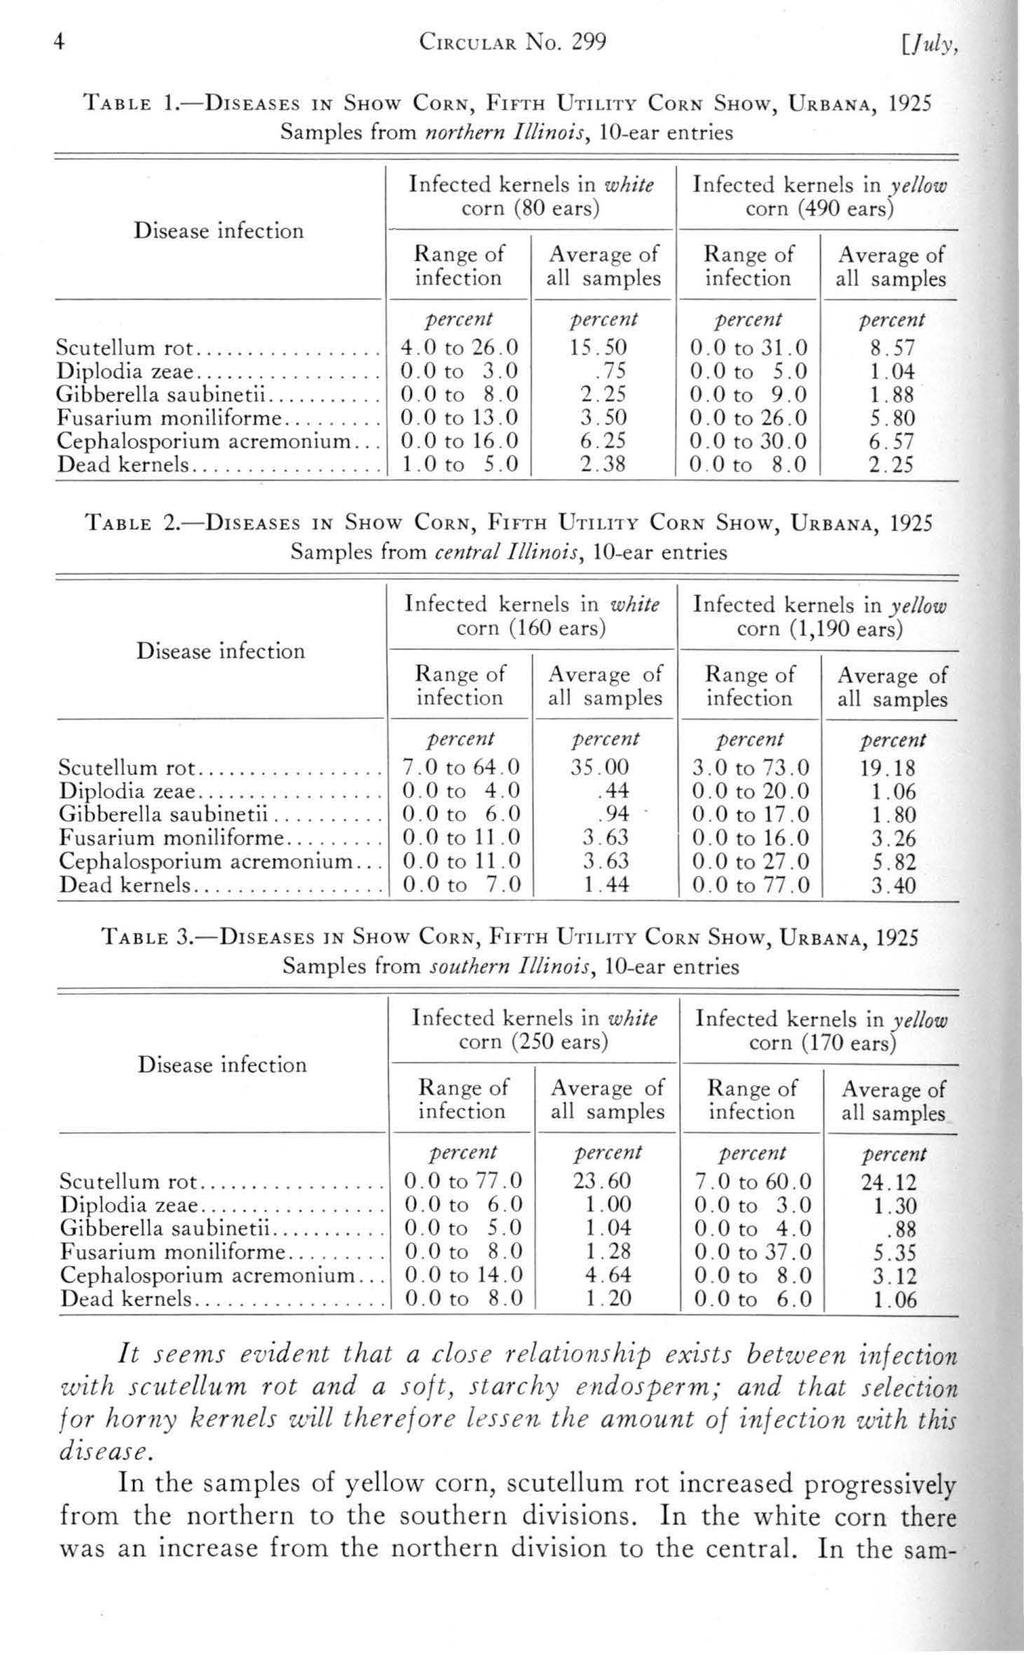 4 CrRCULAR No. 299 [July, TABLE I.-DISEASES IN SHow CoRN, FIFTH UTILITY CoRN SHow, URBANA, 1925 Samples from northern Illinois, 10-ear entries Disease infection Scutellum rot............. Diplodia zeae.